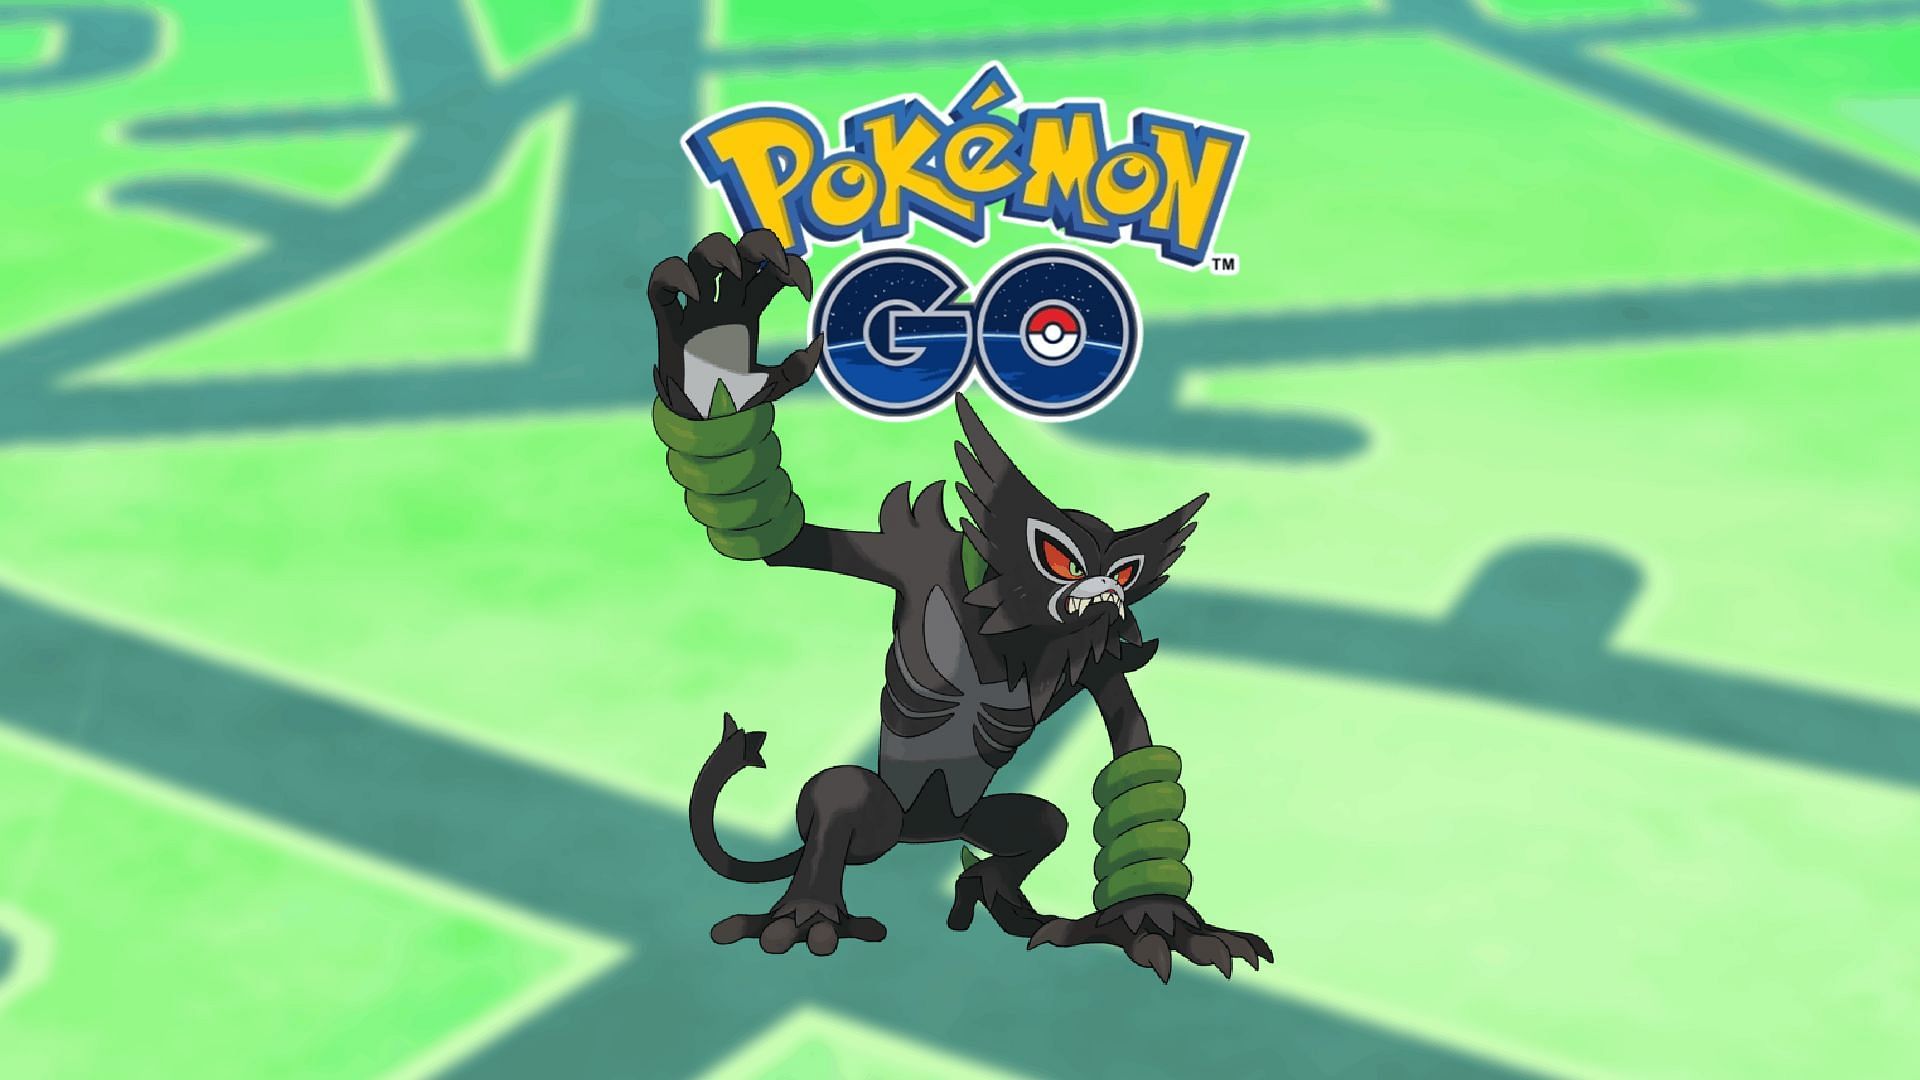 Pokemon GO Rogue of the Jungle Special Research tasks and rewards